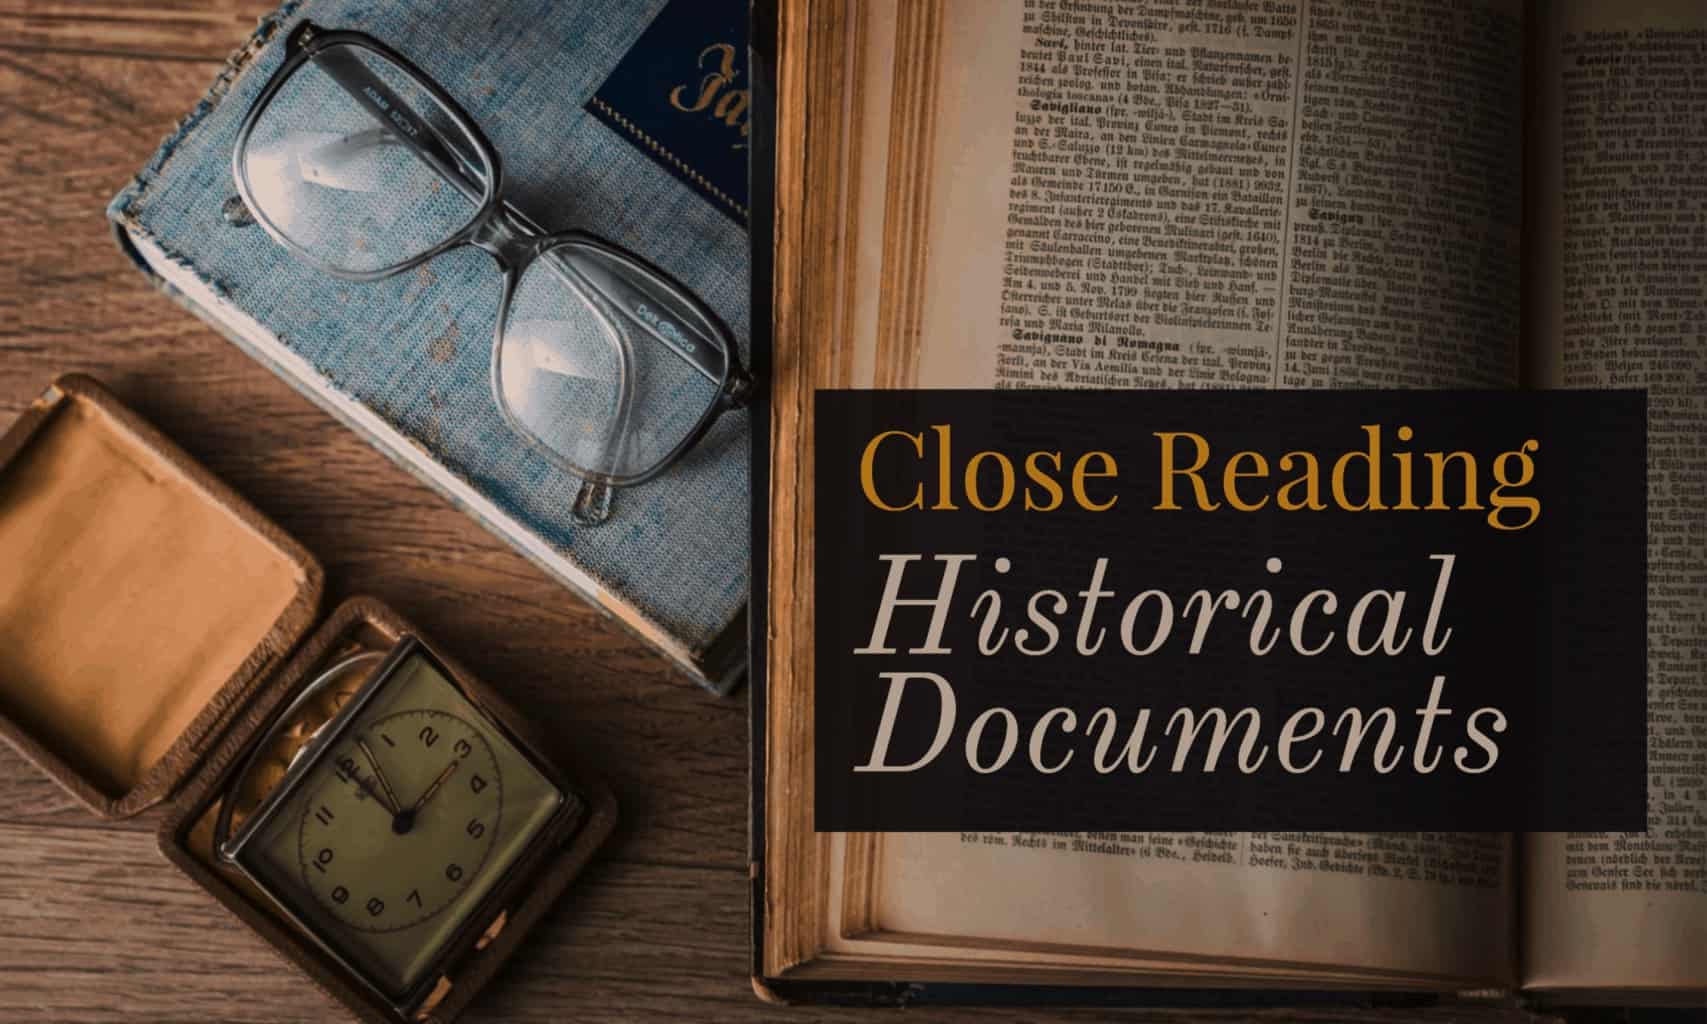 Close Reading Historical Documents